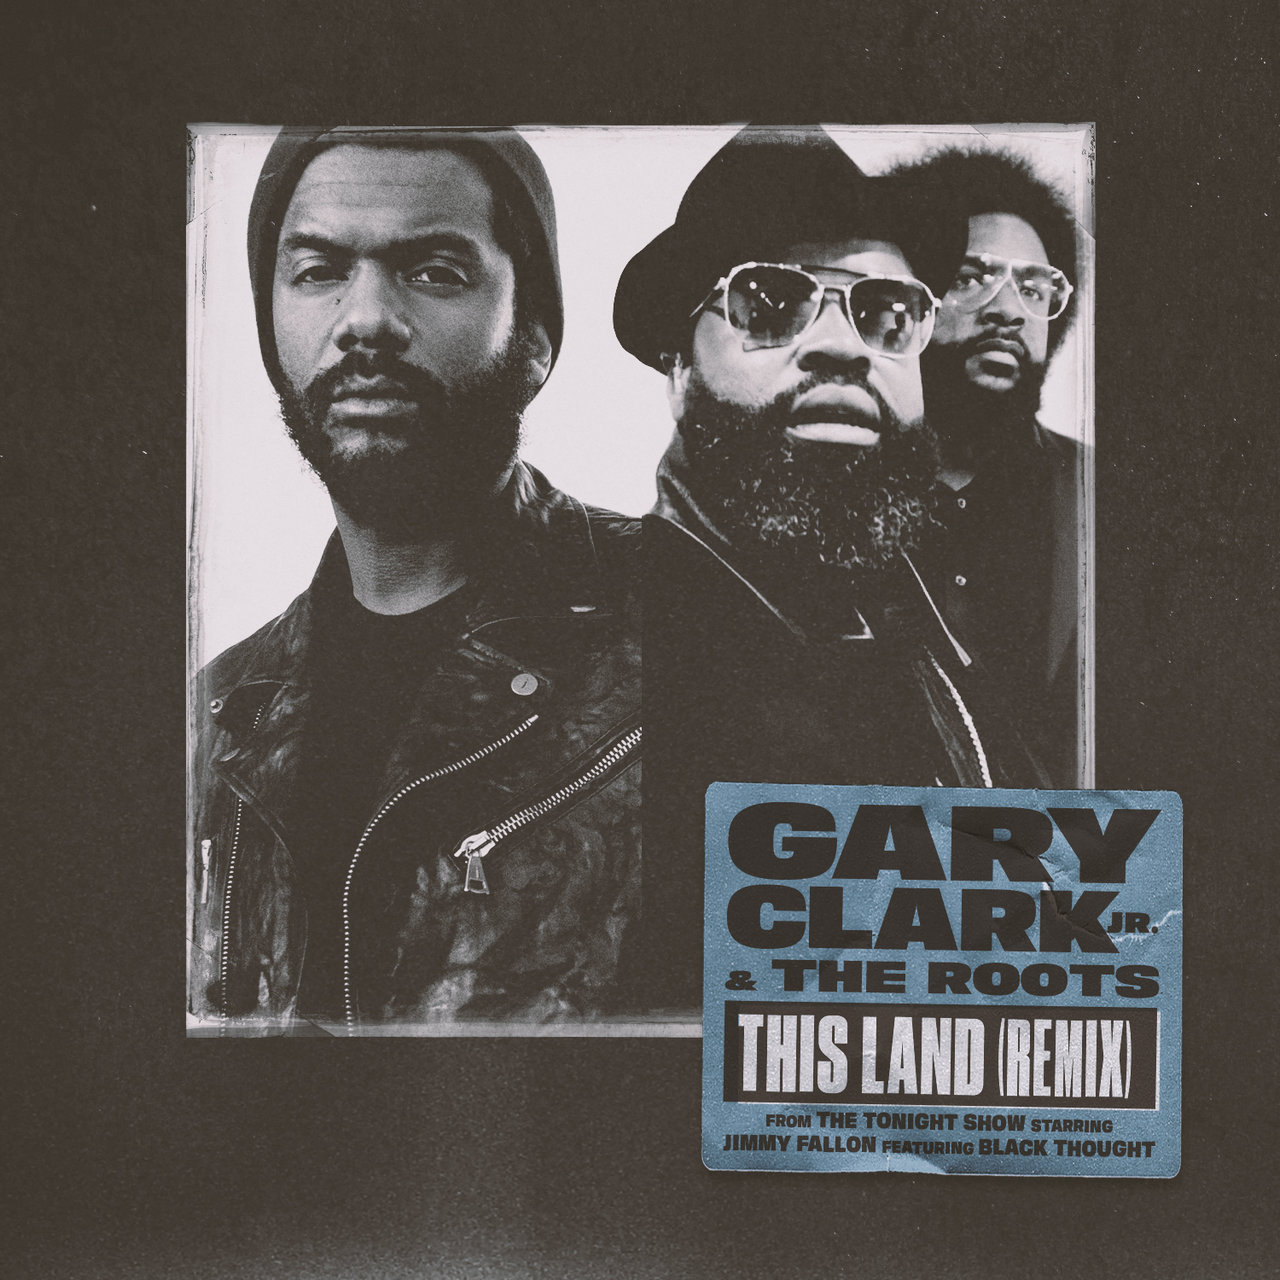 Gary Clark Jr. brings "The Land" featuring the Roots on the new remix. "The Land" years ago was up for multiple Grammy nominations.